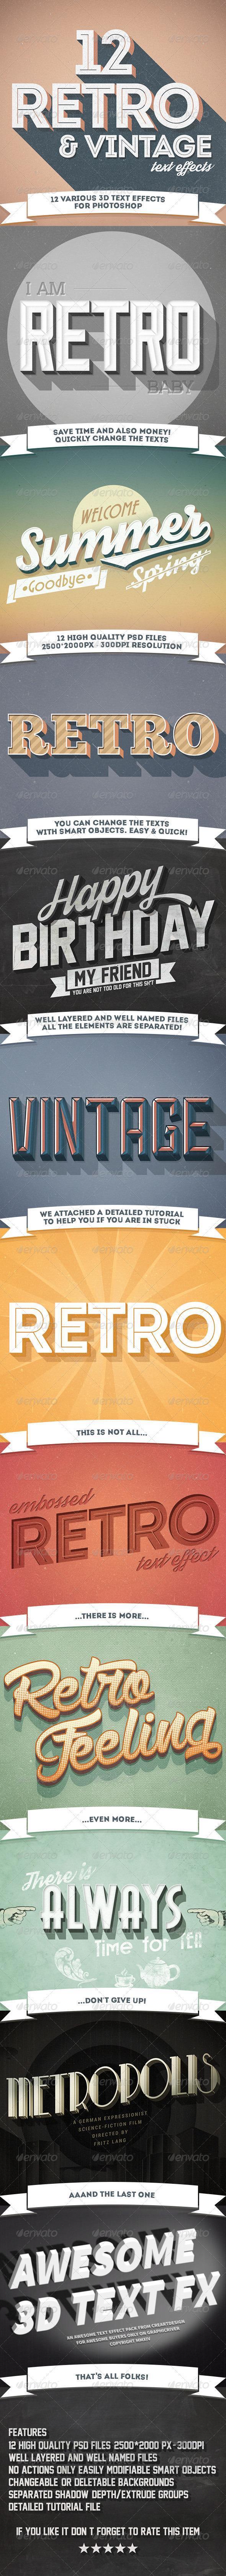 Retro and Vintage Photoshop Text Effects